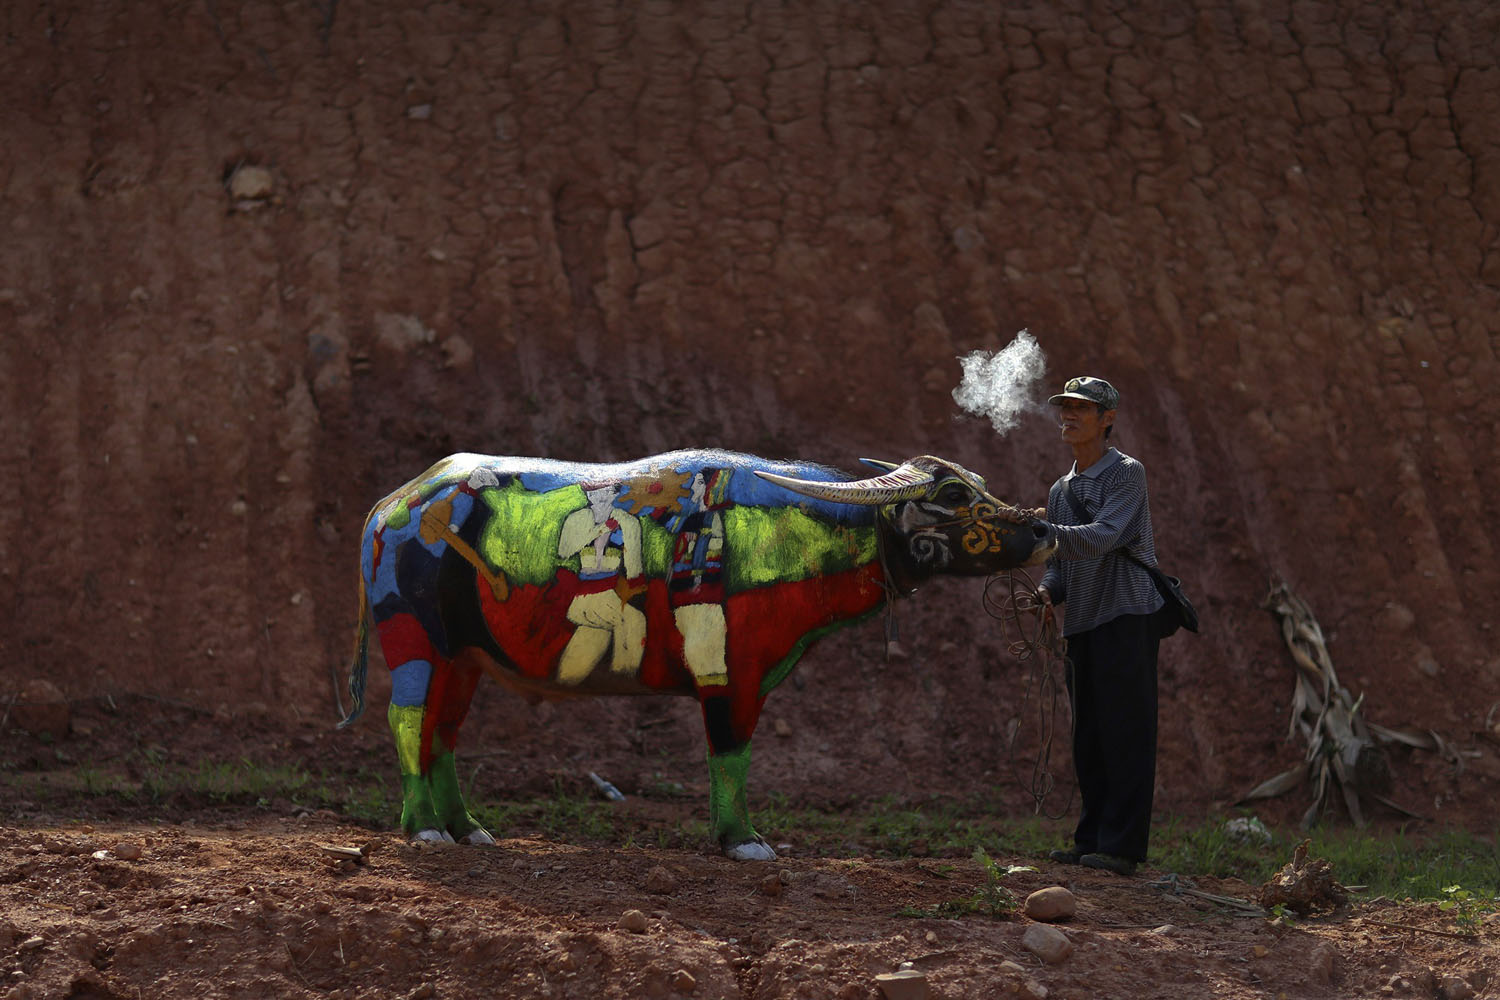 A man smokes as he waits with his painted buffalo before a buffalo bodypainting competition in Jiangcheng county, Yunnan province, China on May 18, 2014.